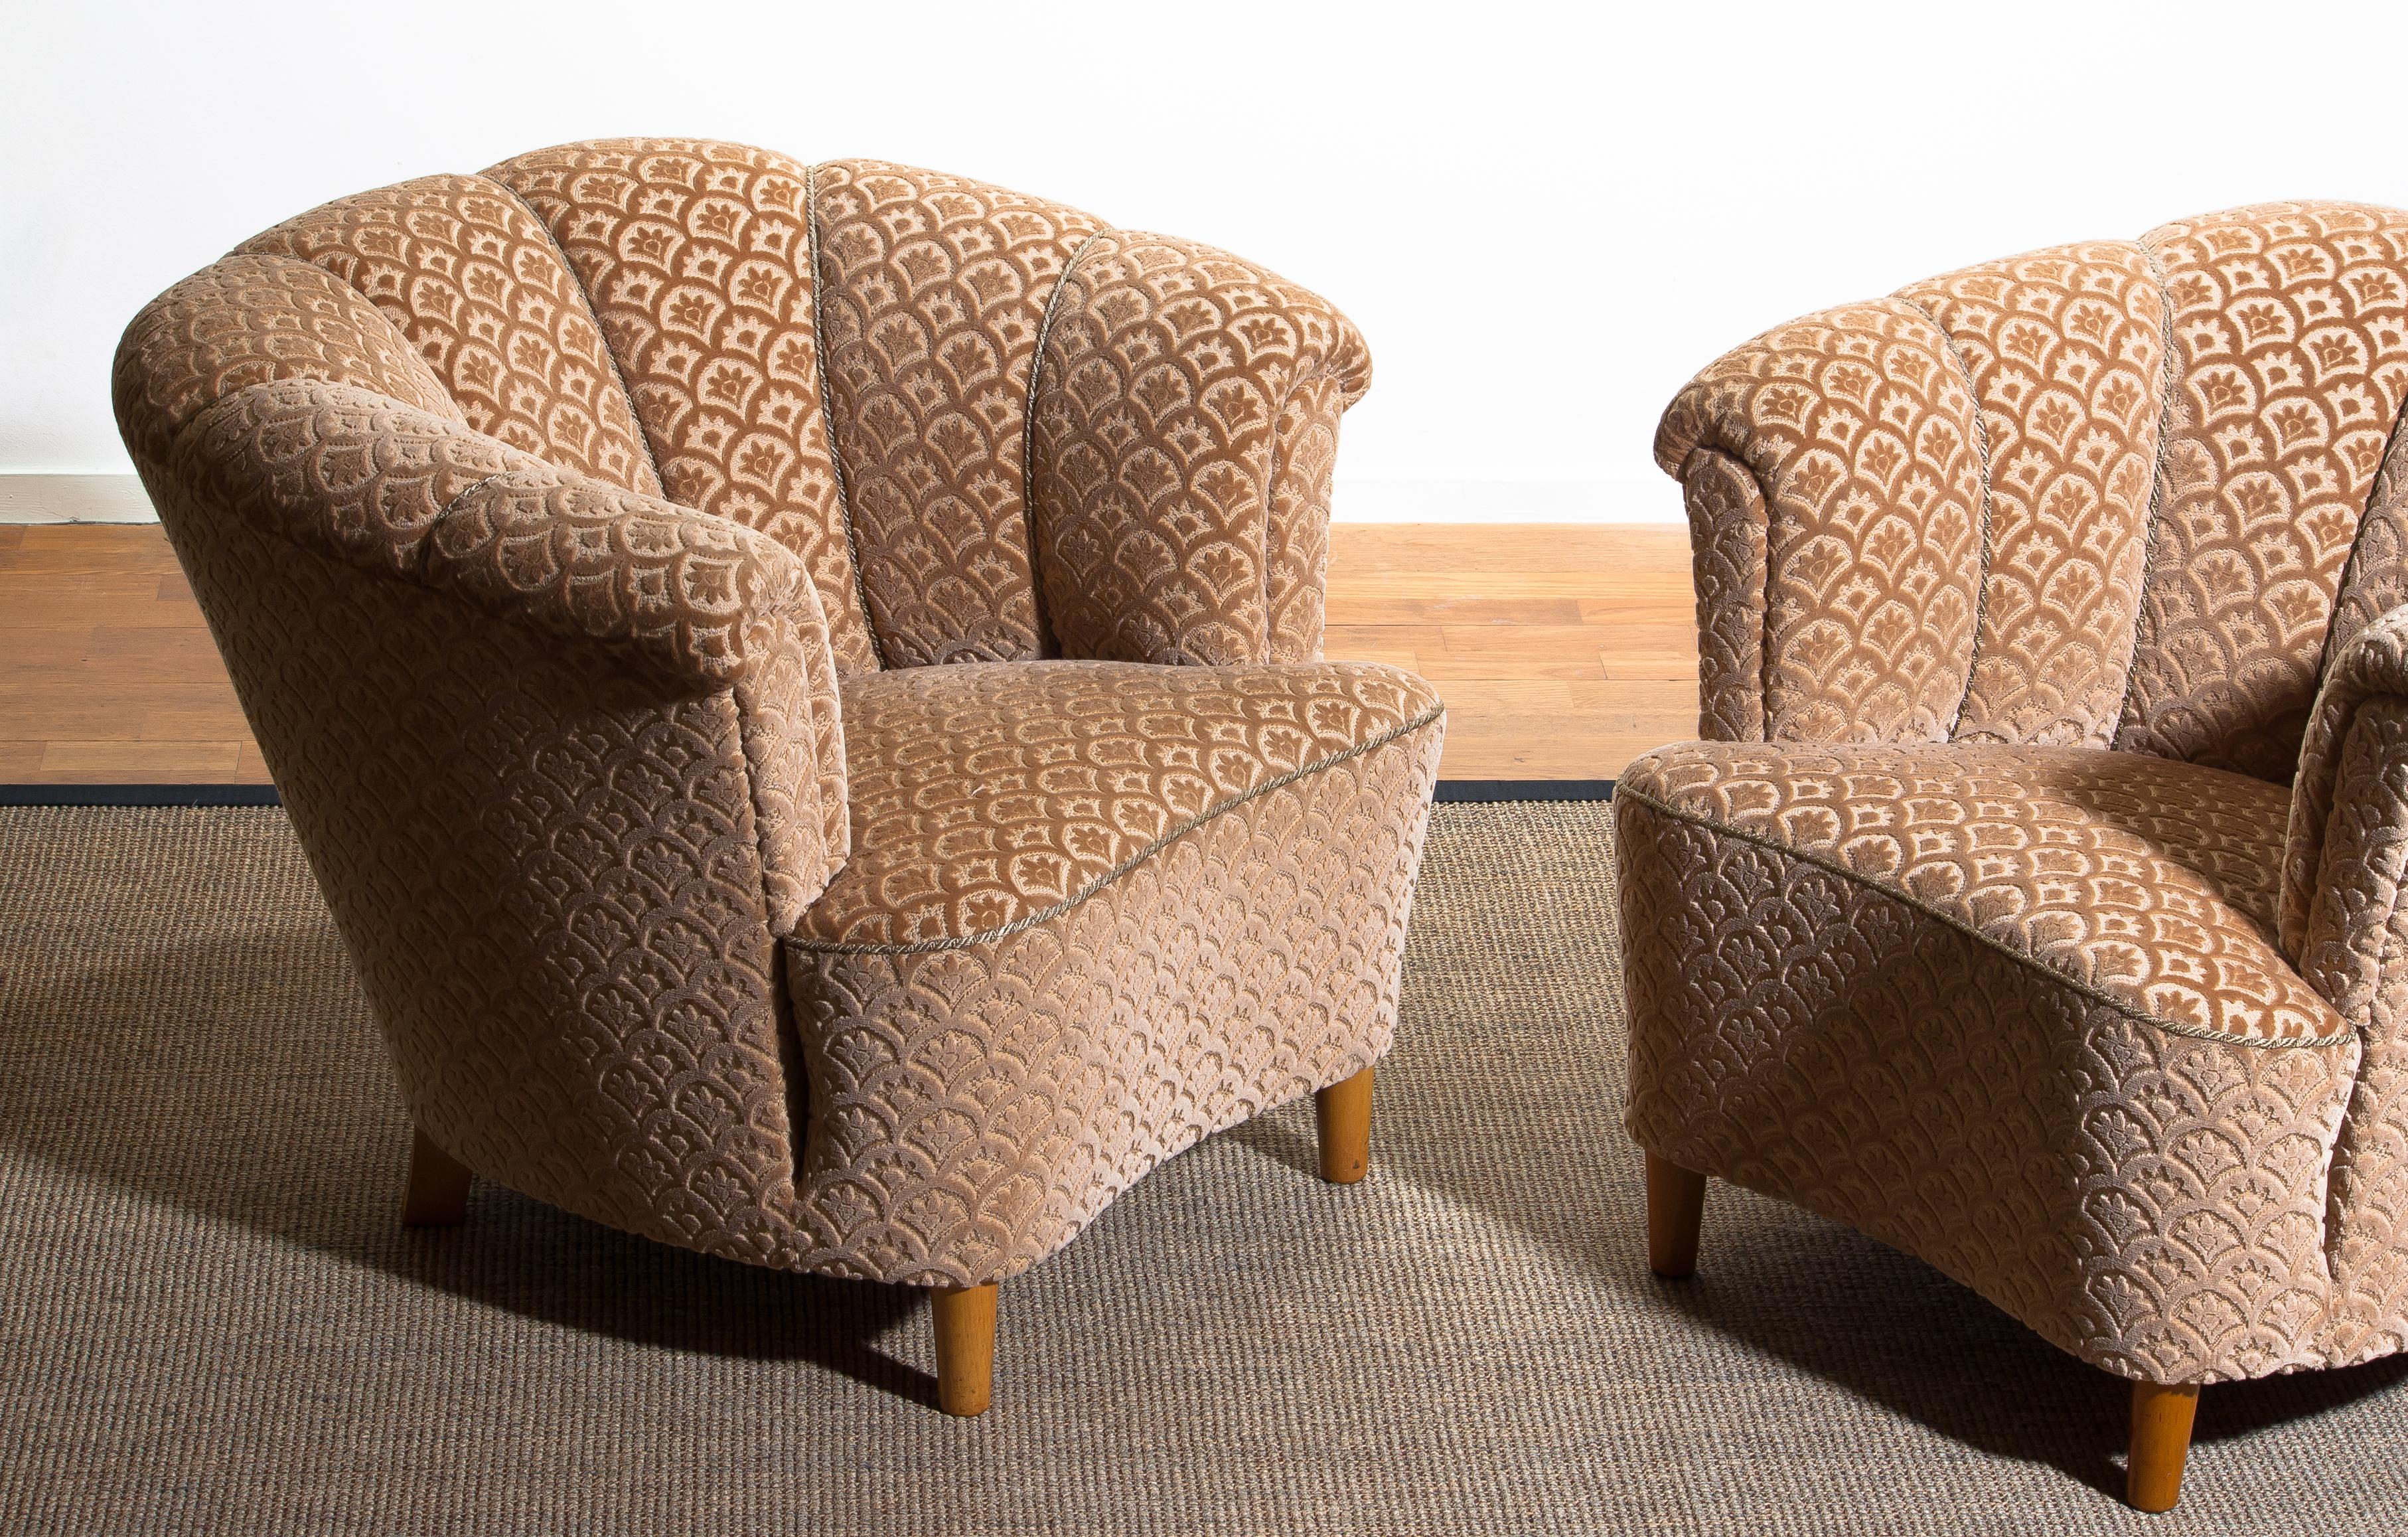 Mid-20th Century 1940s, Pair of Shell Back Club Lounge Cocktail Chairs from Sweden